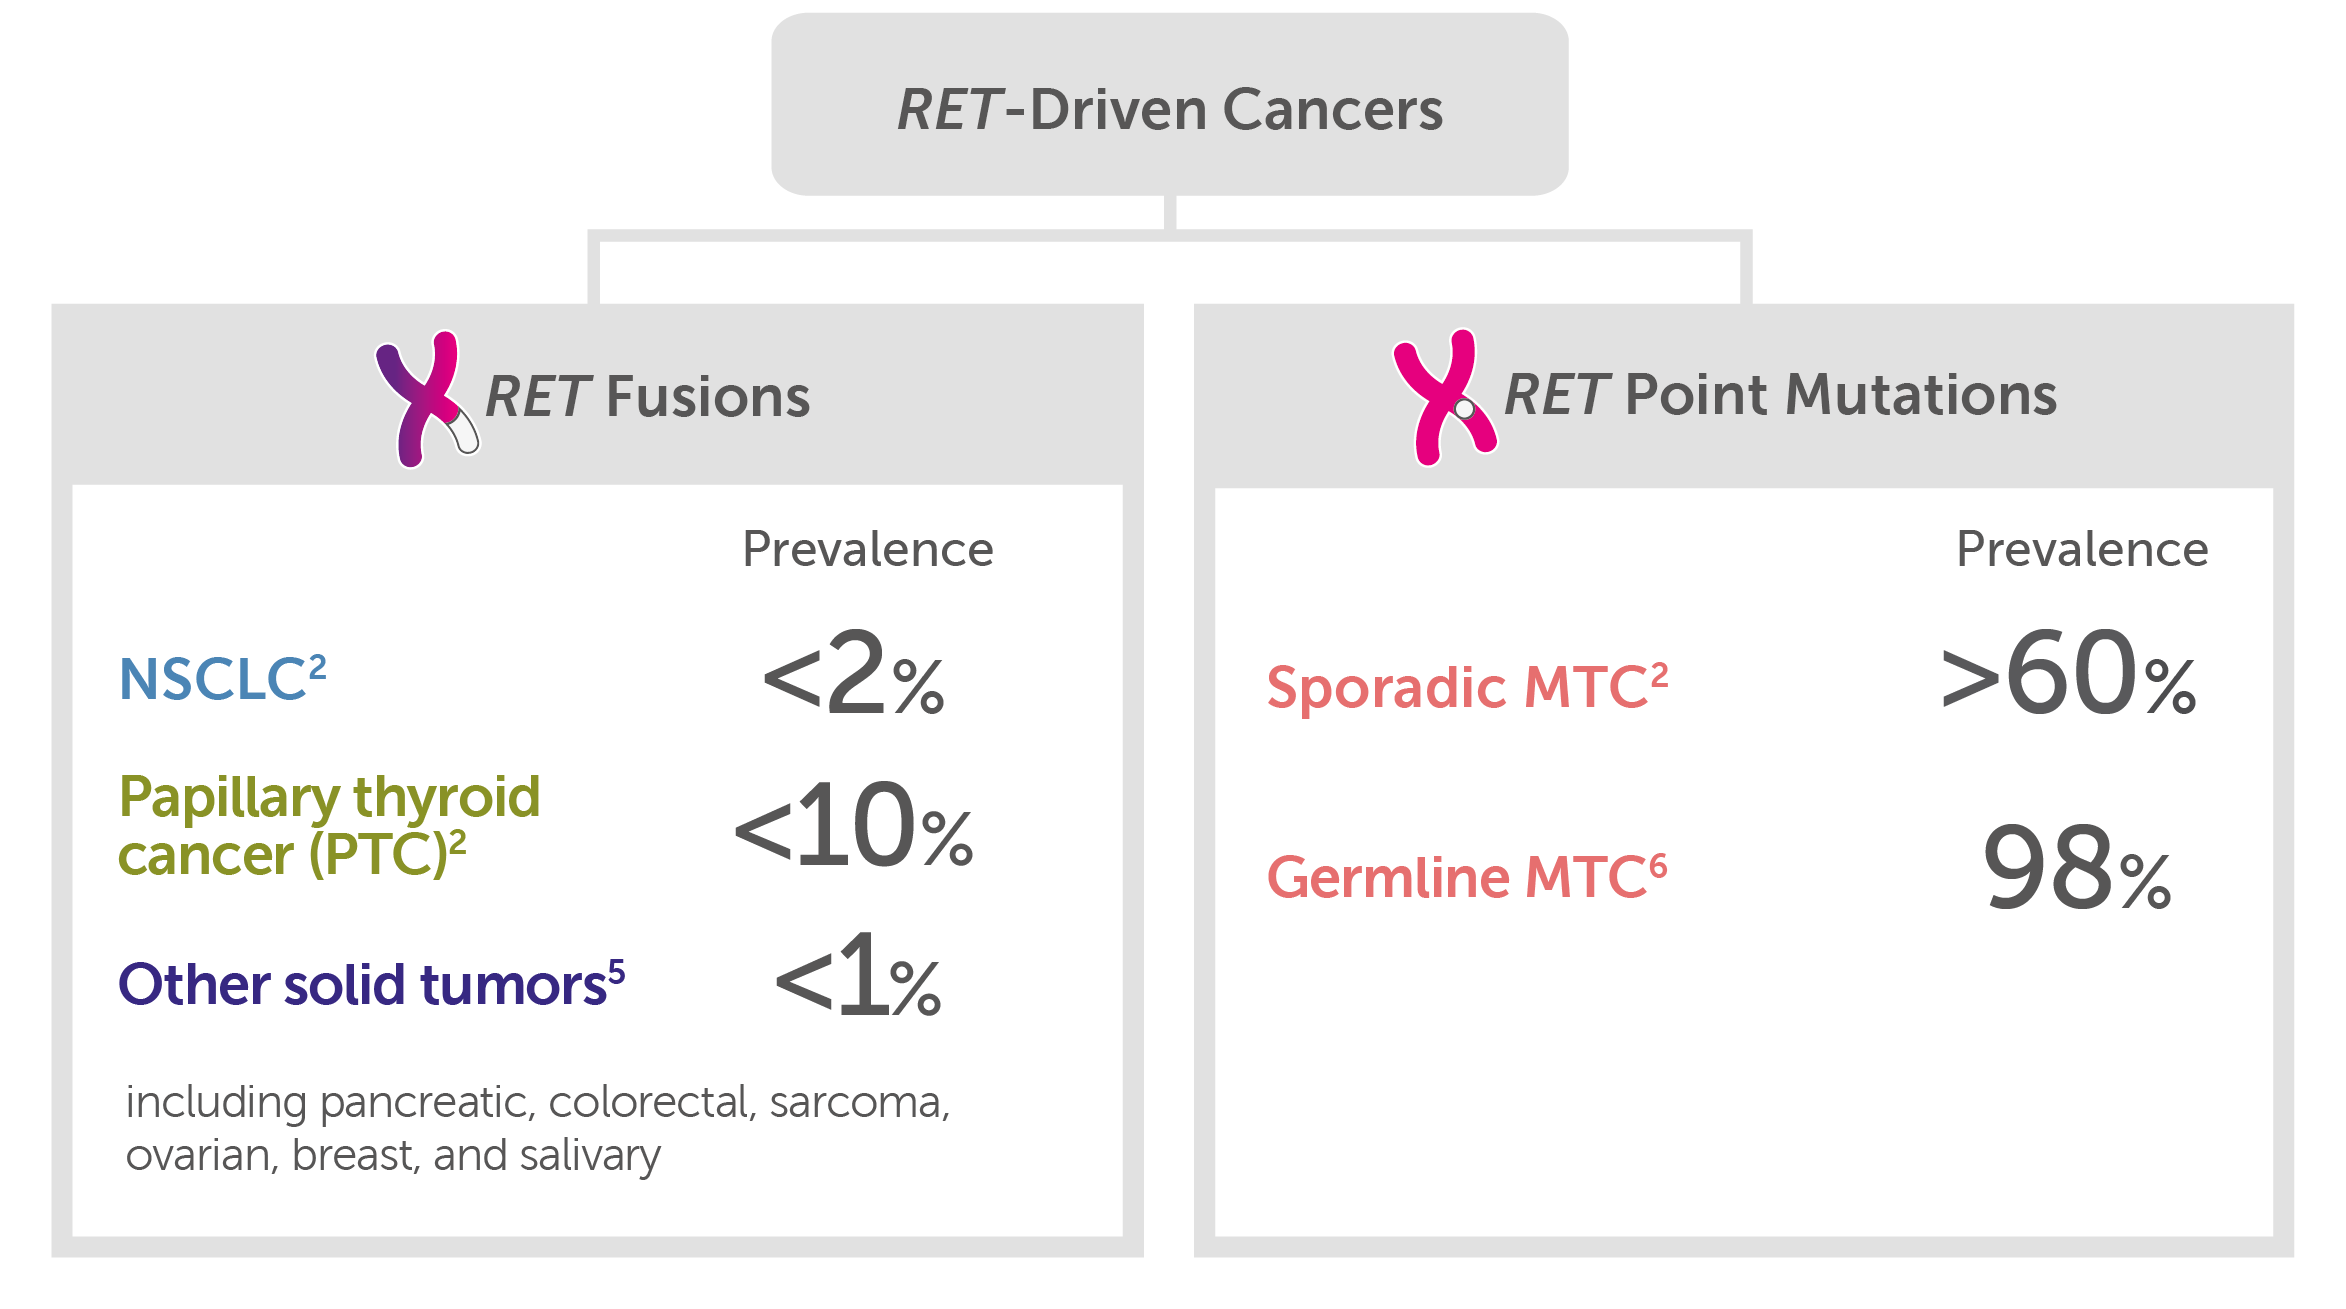 Role of RET for RET-driven cancers such as RET fusions and RET point mutations